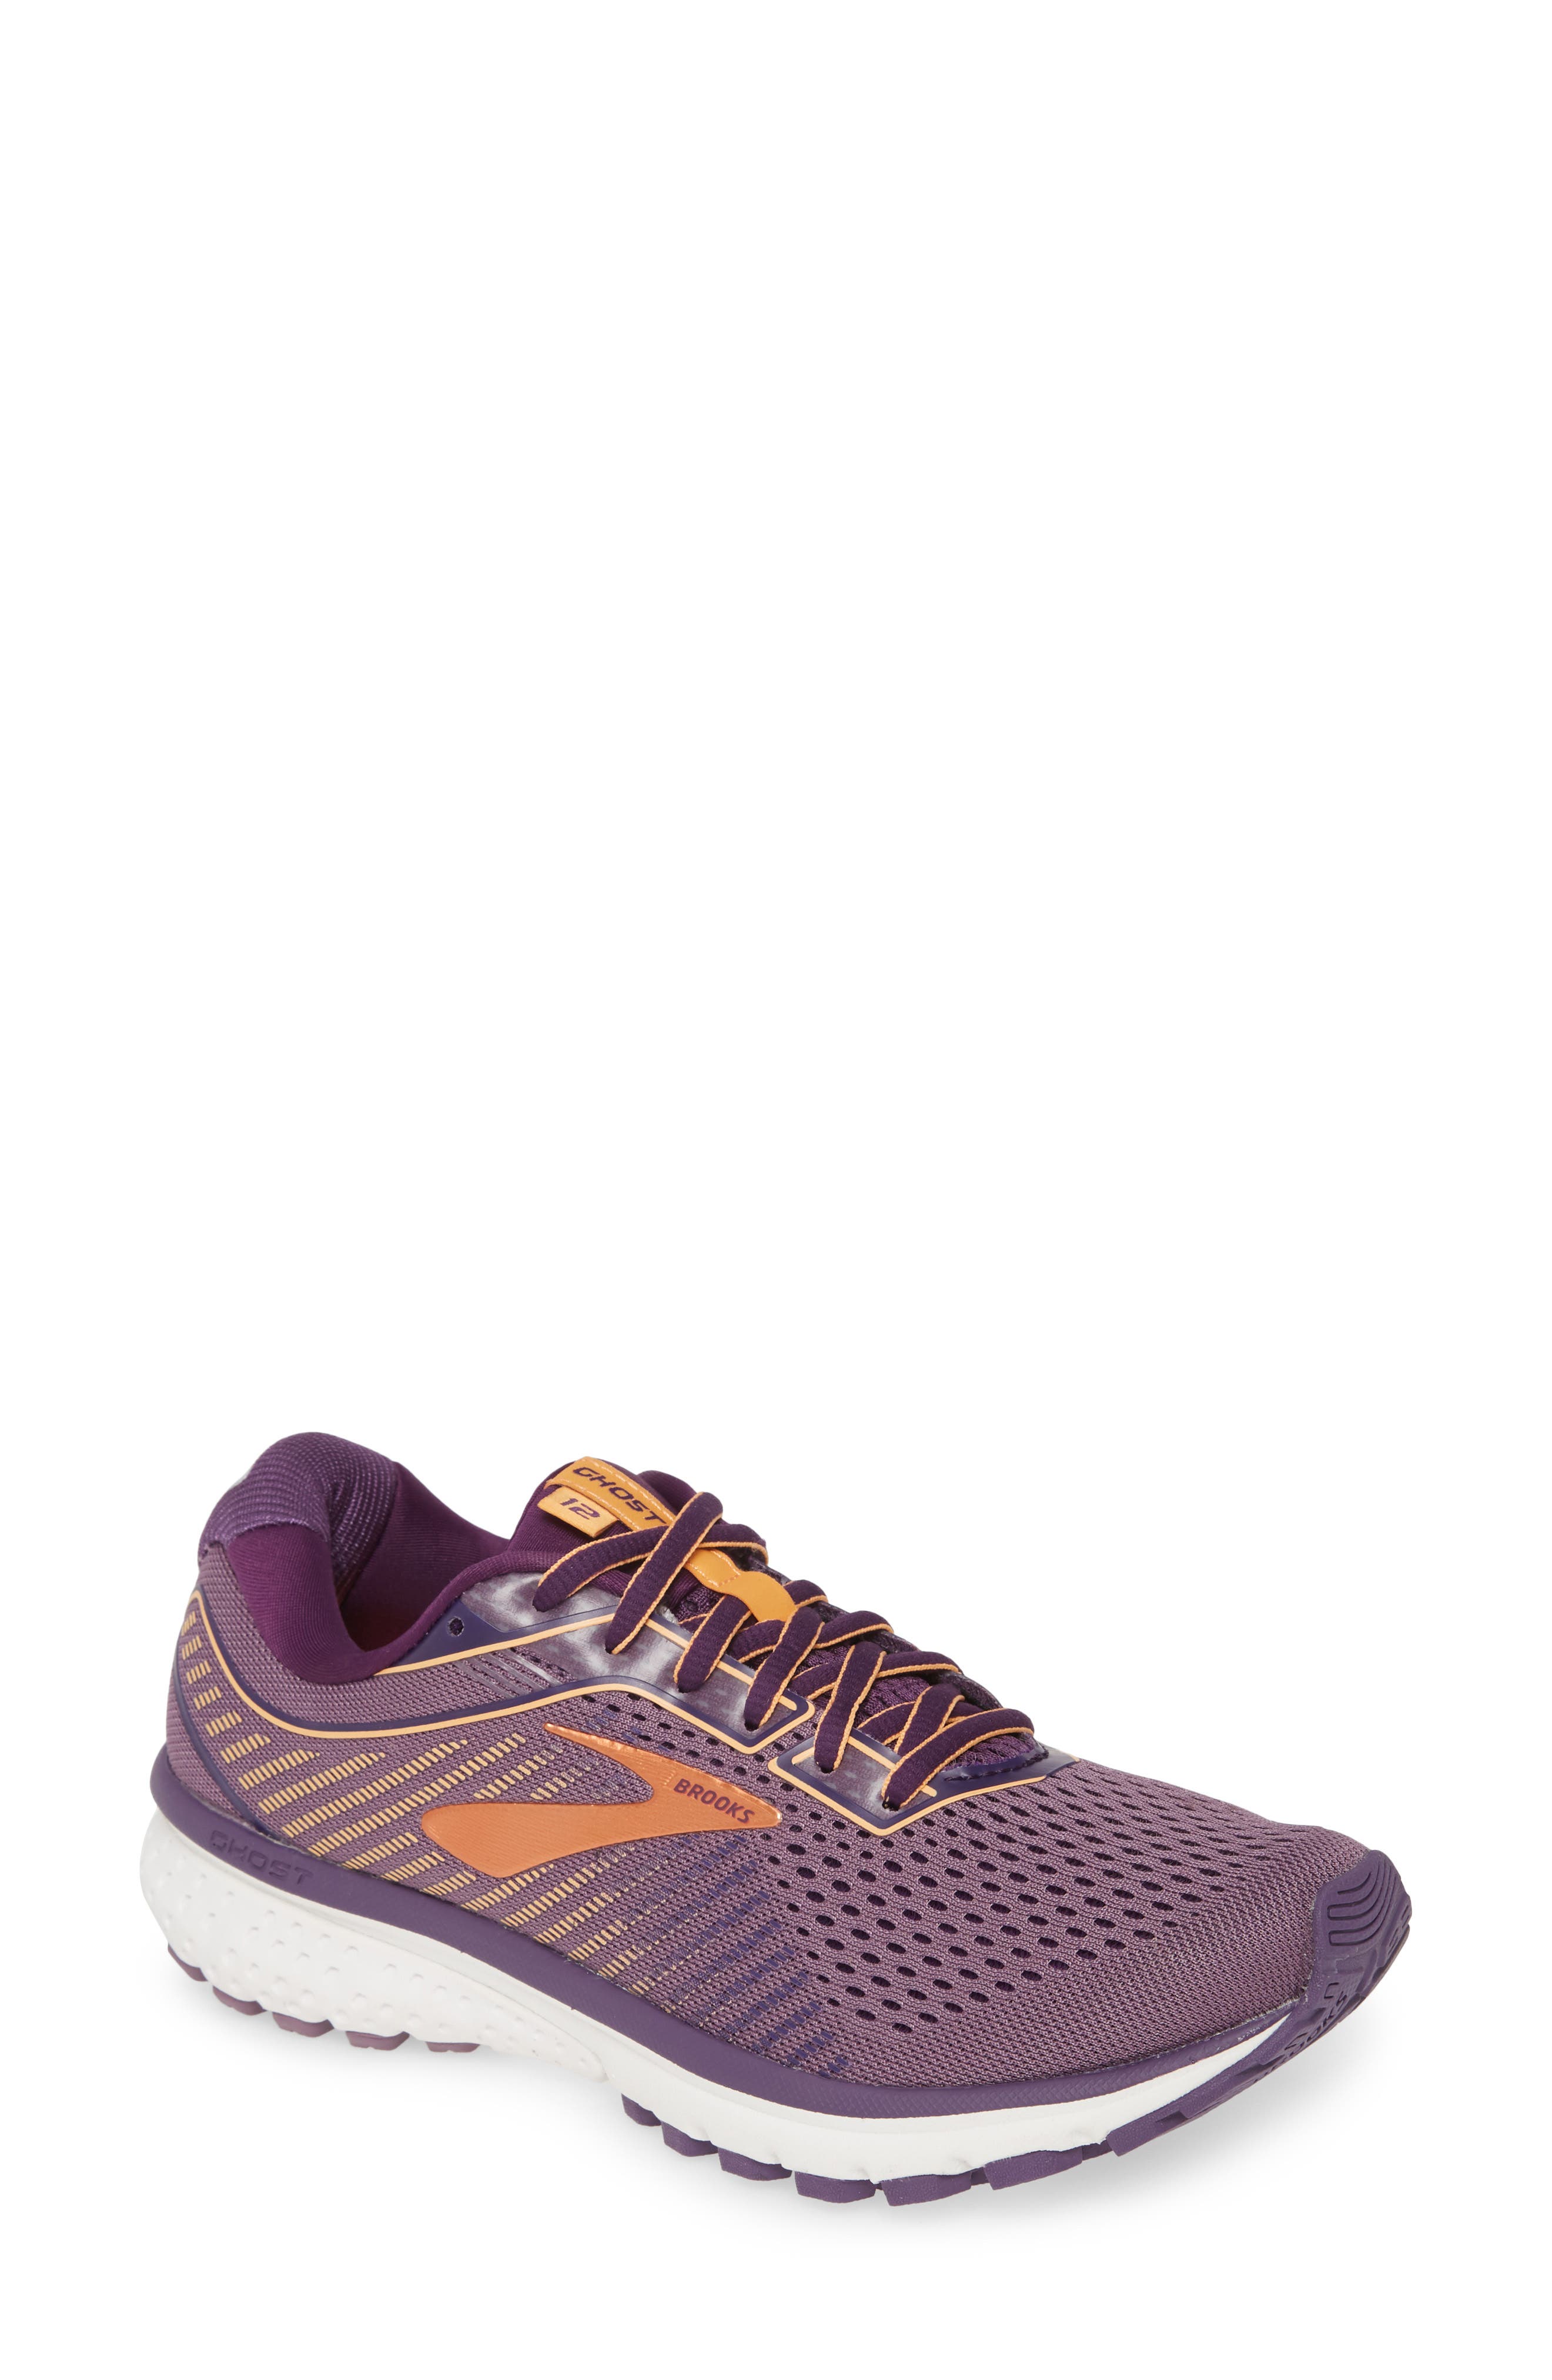 brooks ghost 1 womens silver